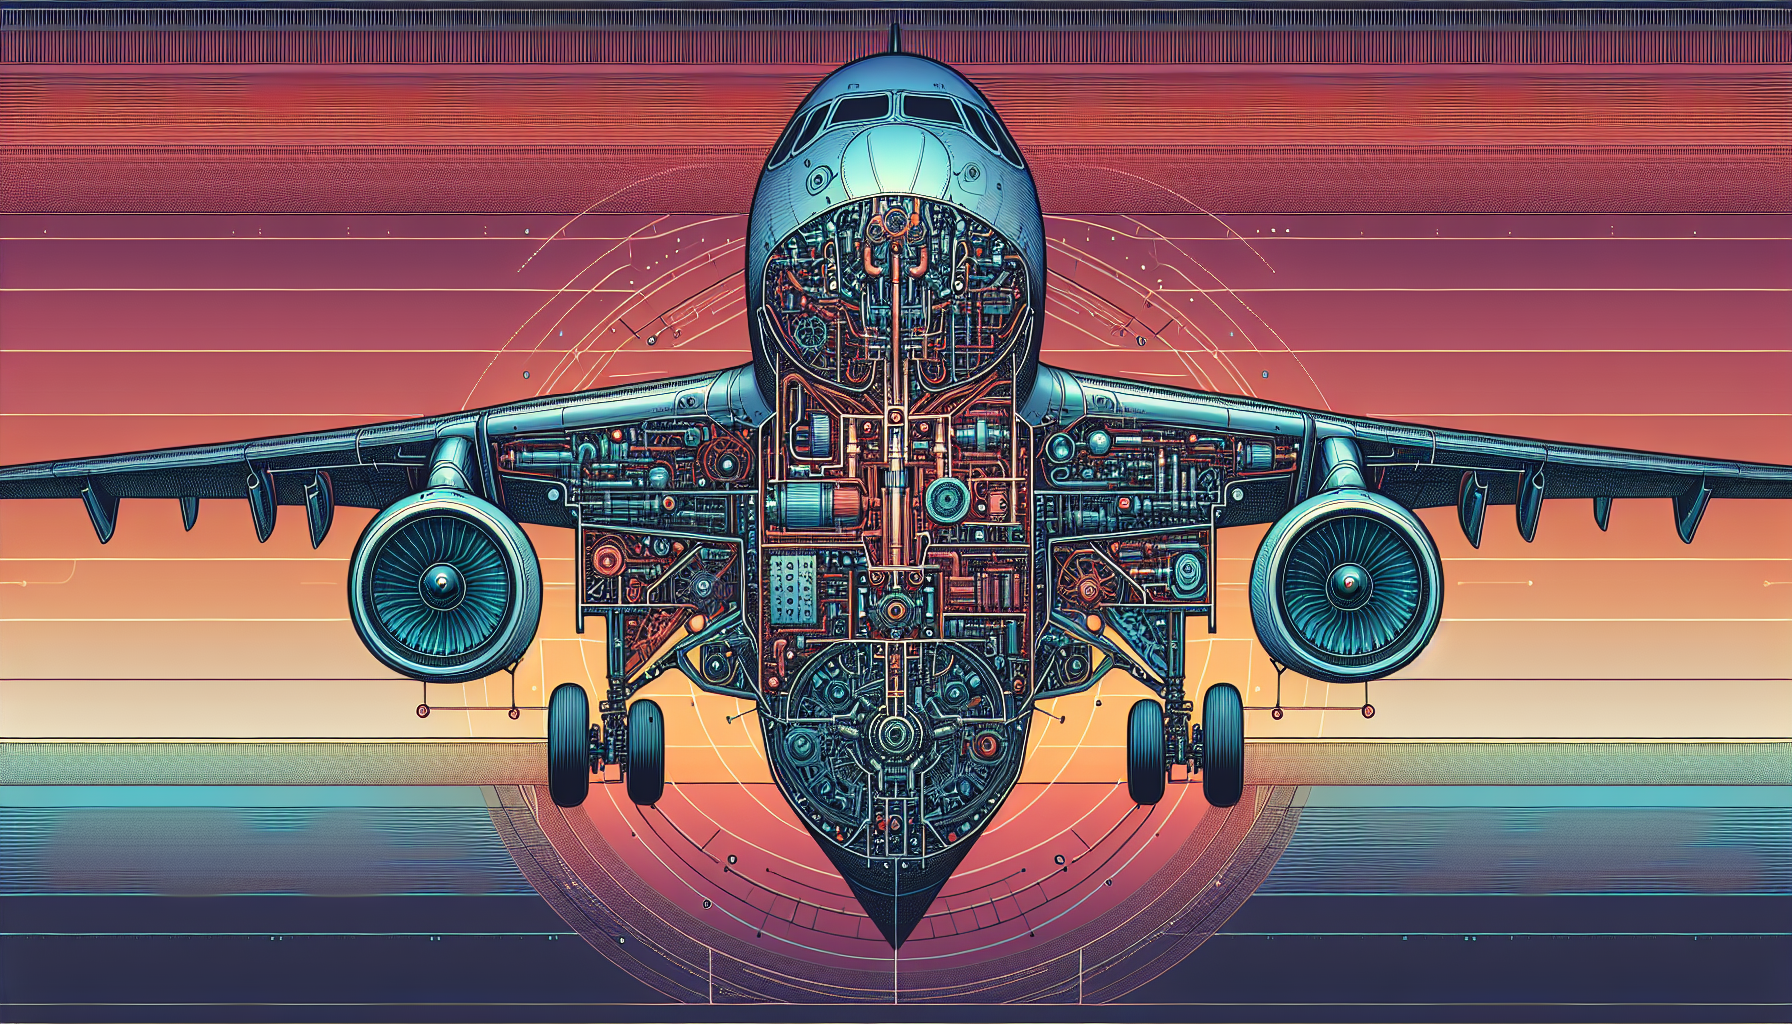 Illustration of multi-engine aircraft systems